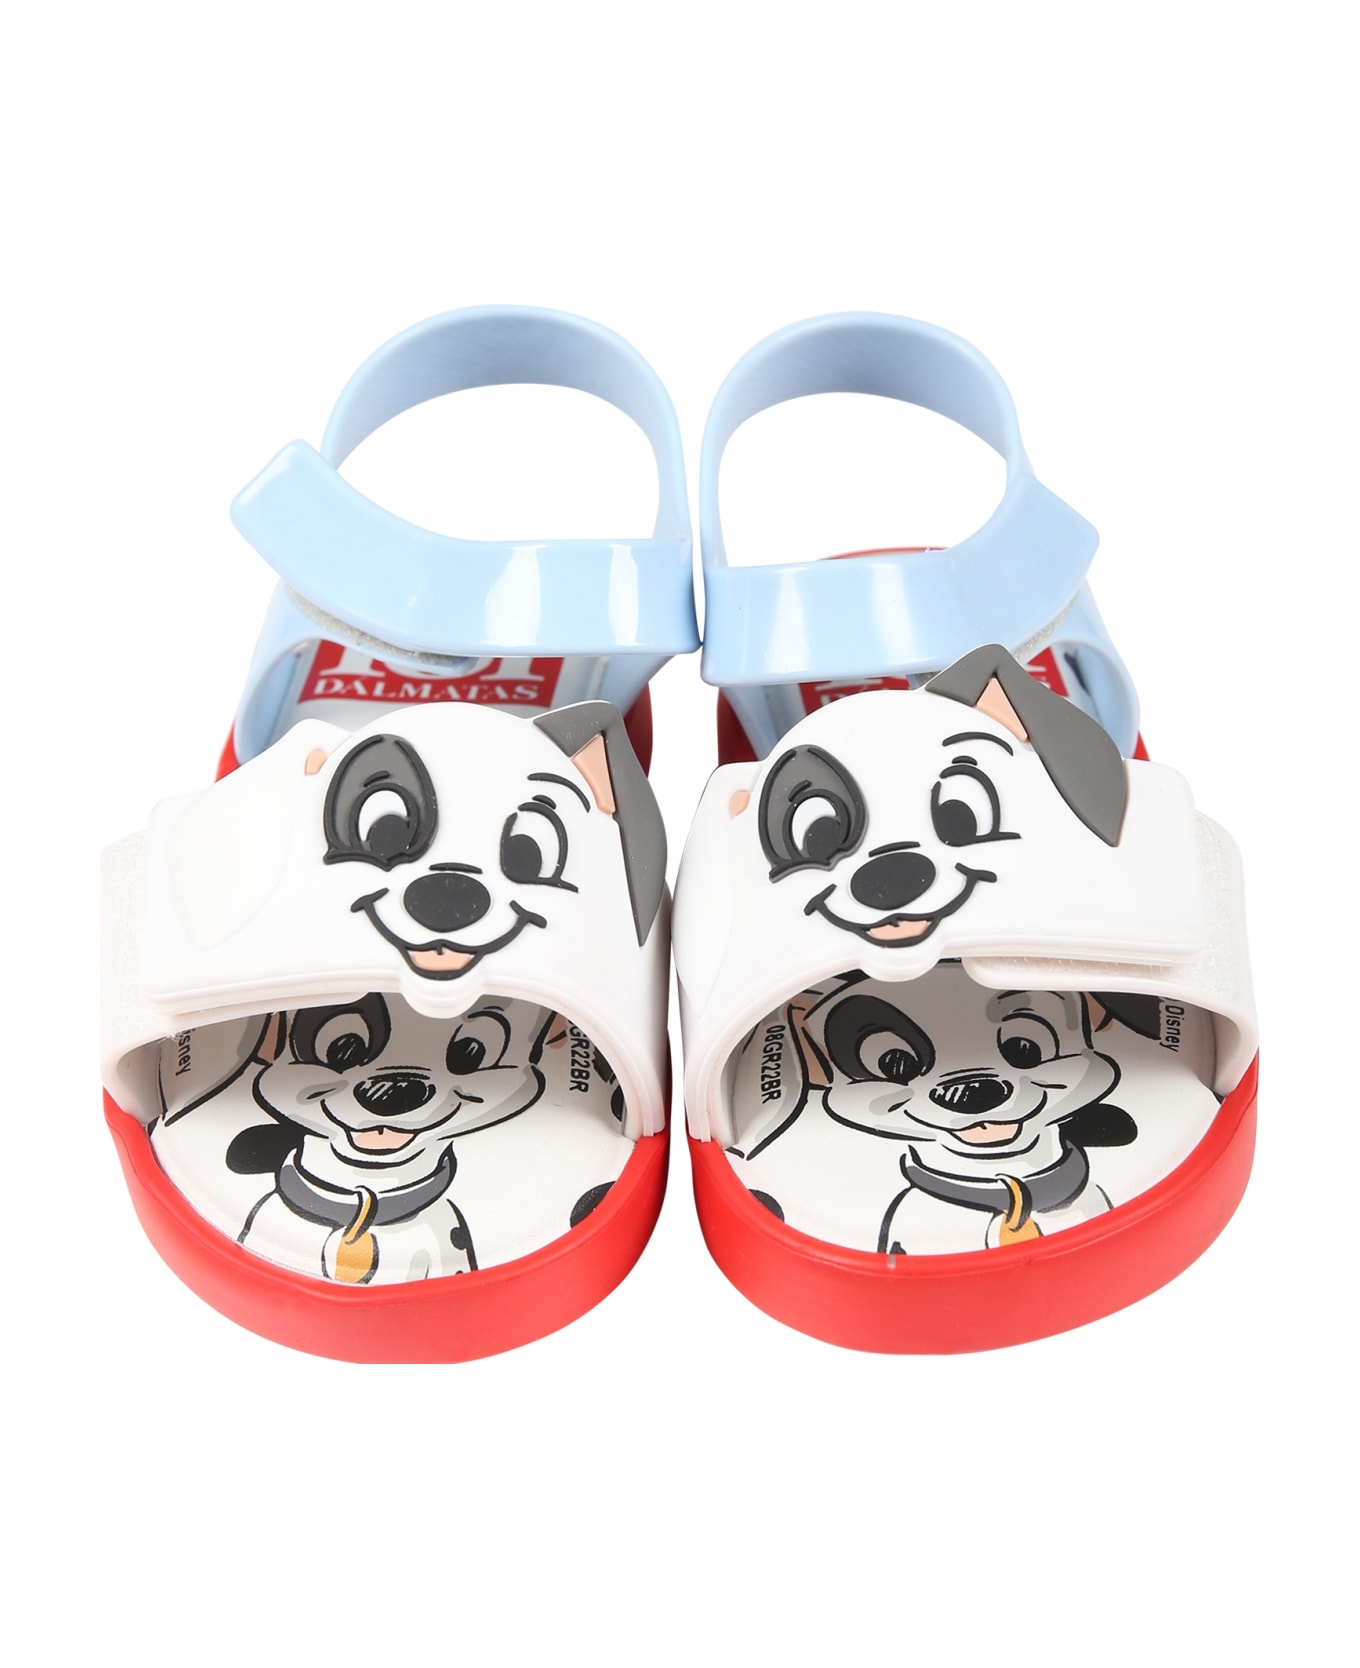 Melissa Red Sandals For Kids With 101 Dalmatians - Red シューズ